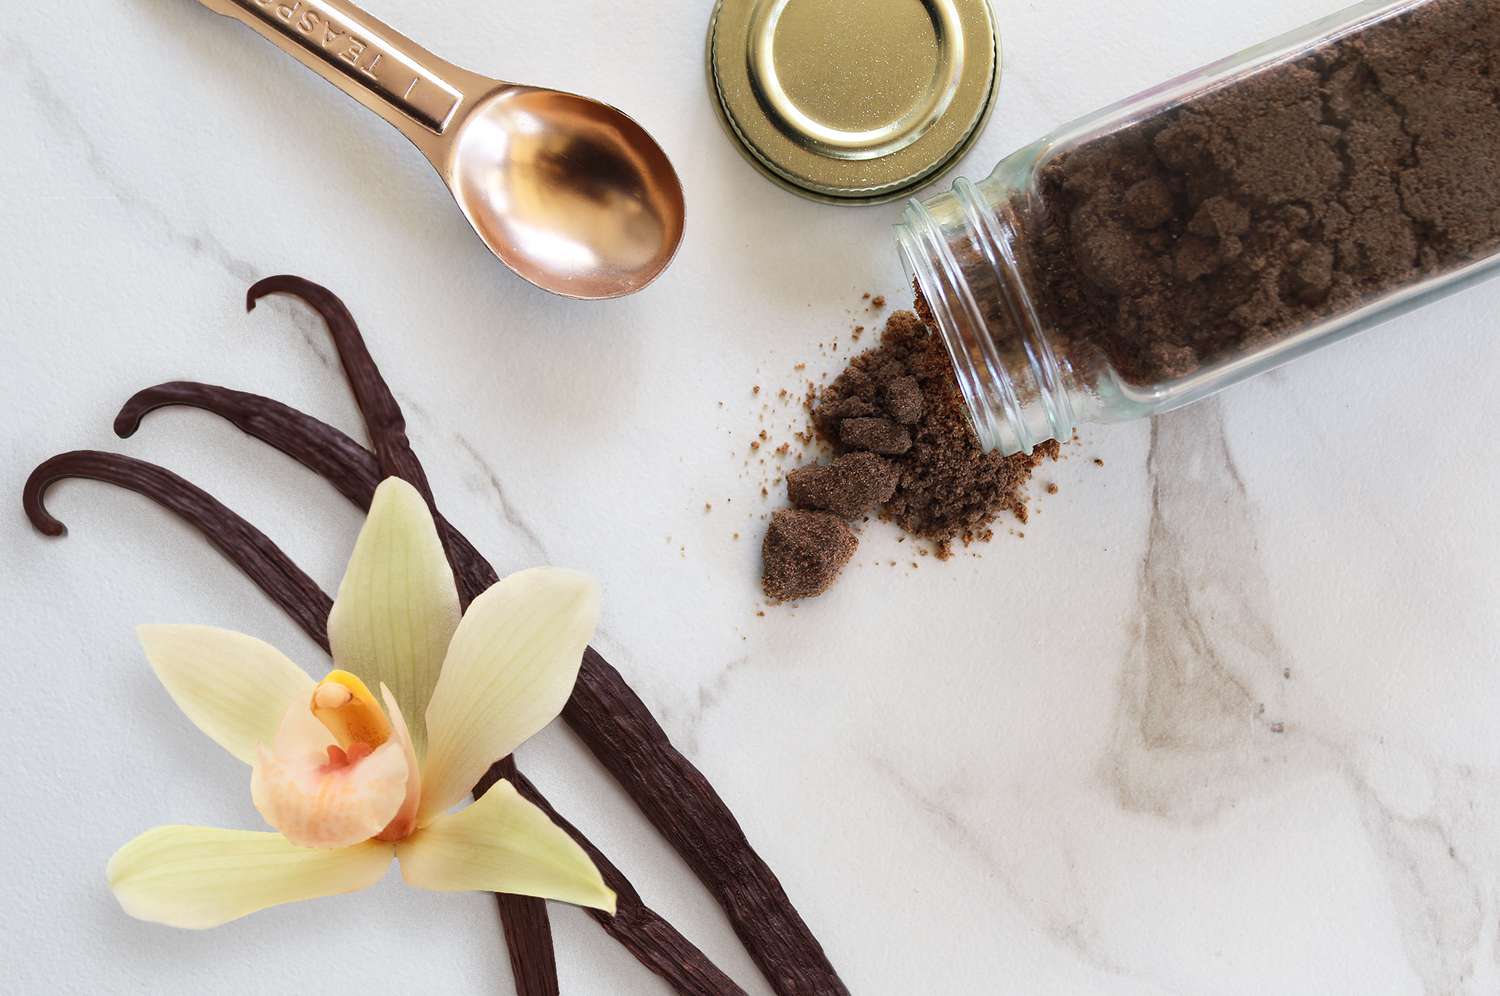 Ground vanilla in a glass bottle, metal teaspoon, and vanilla beans on a marble countertop